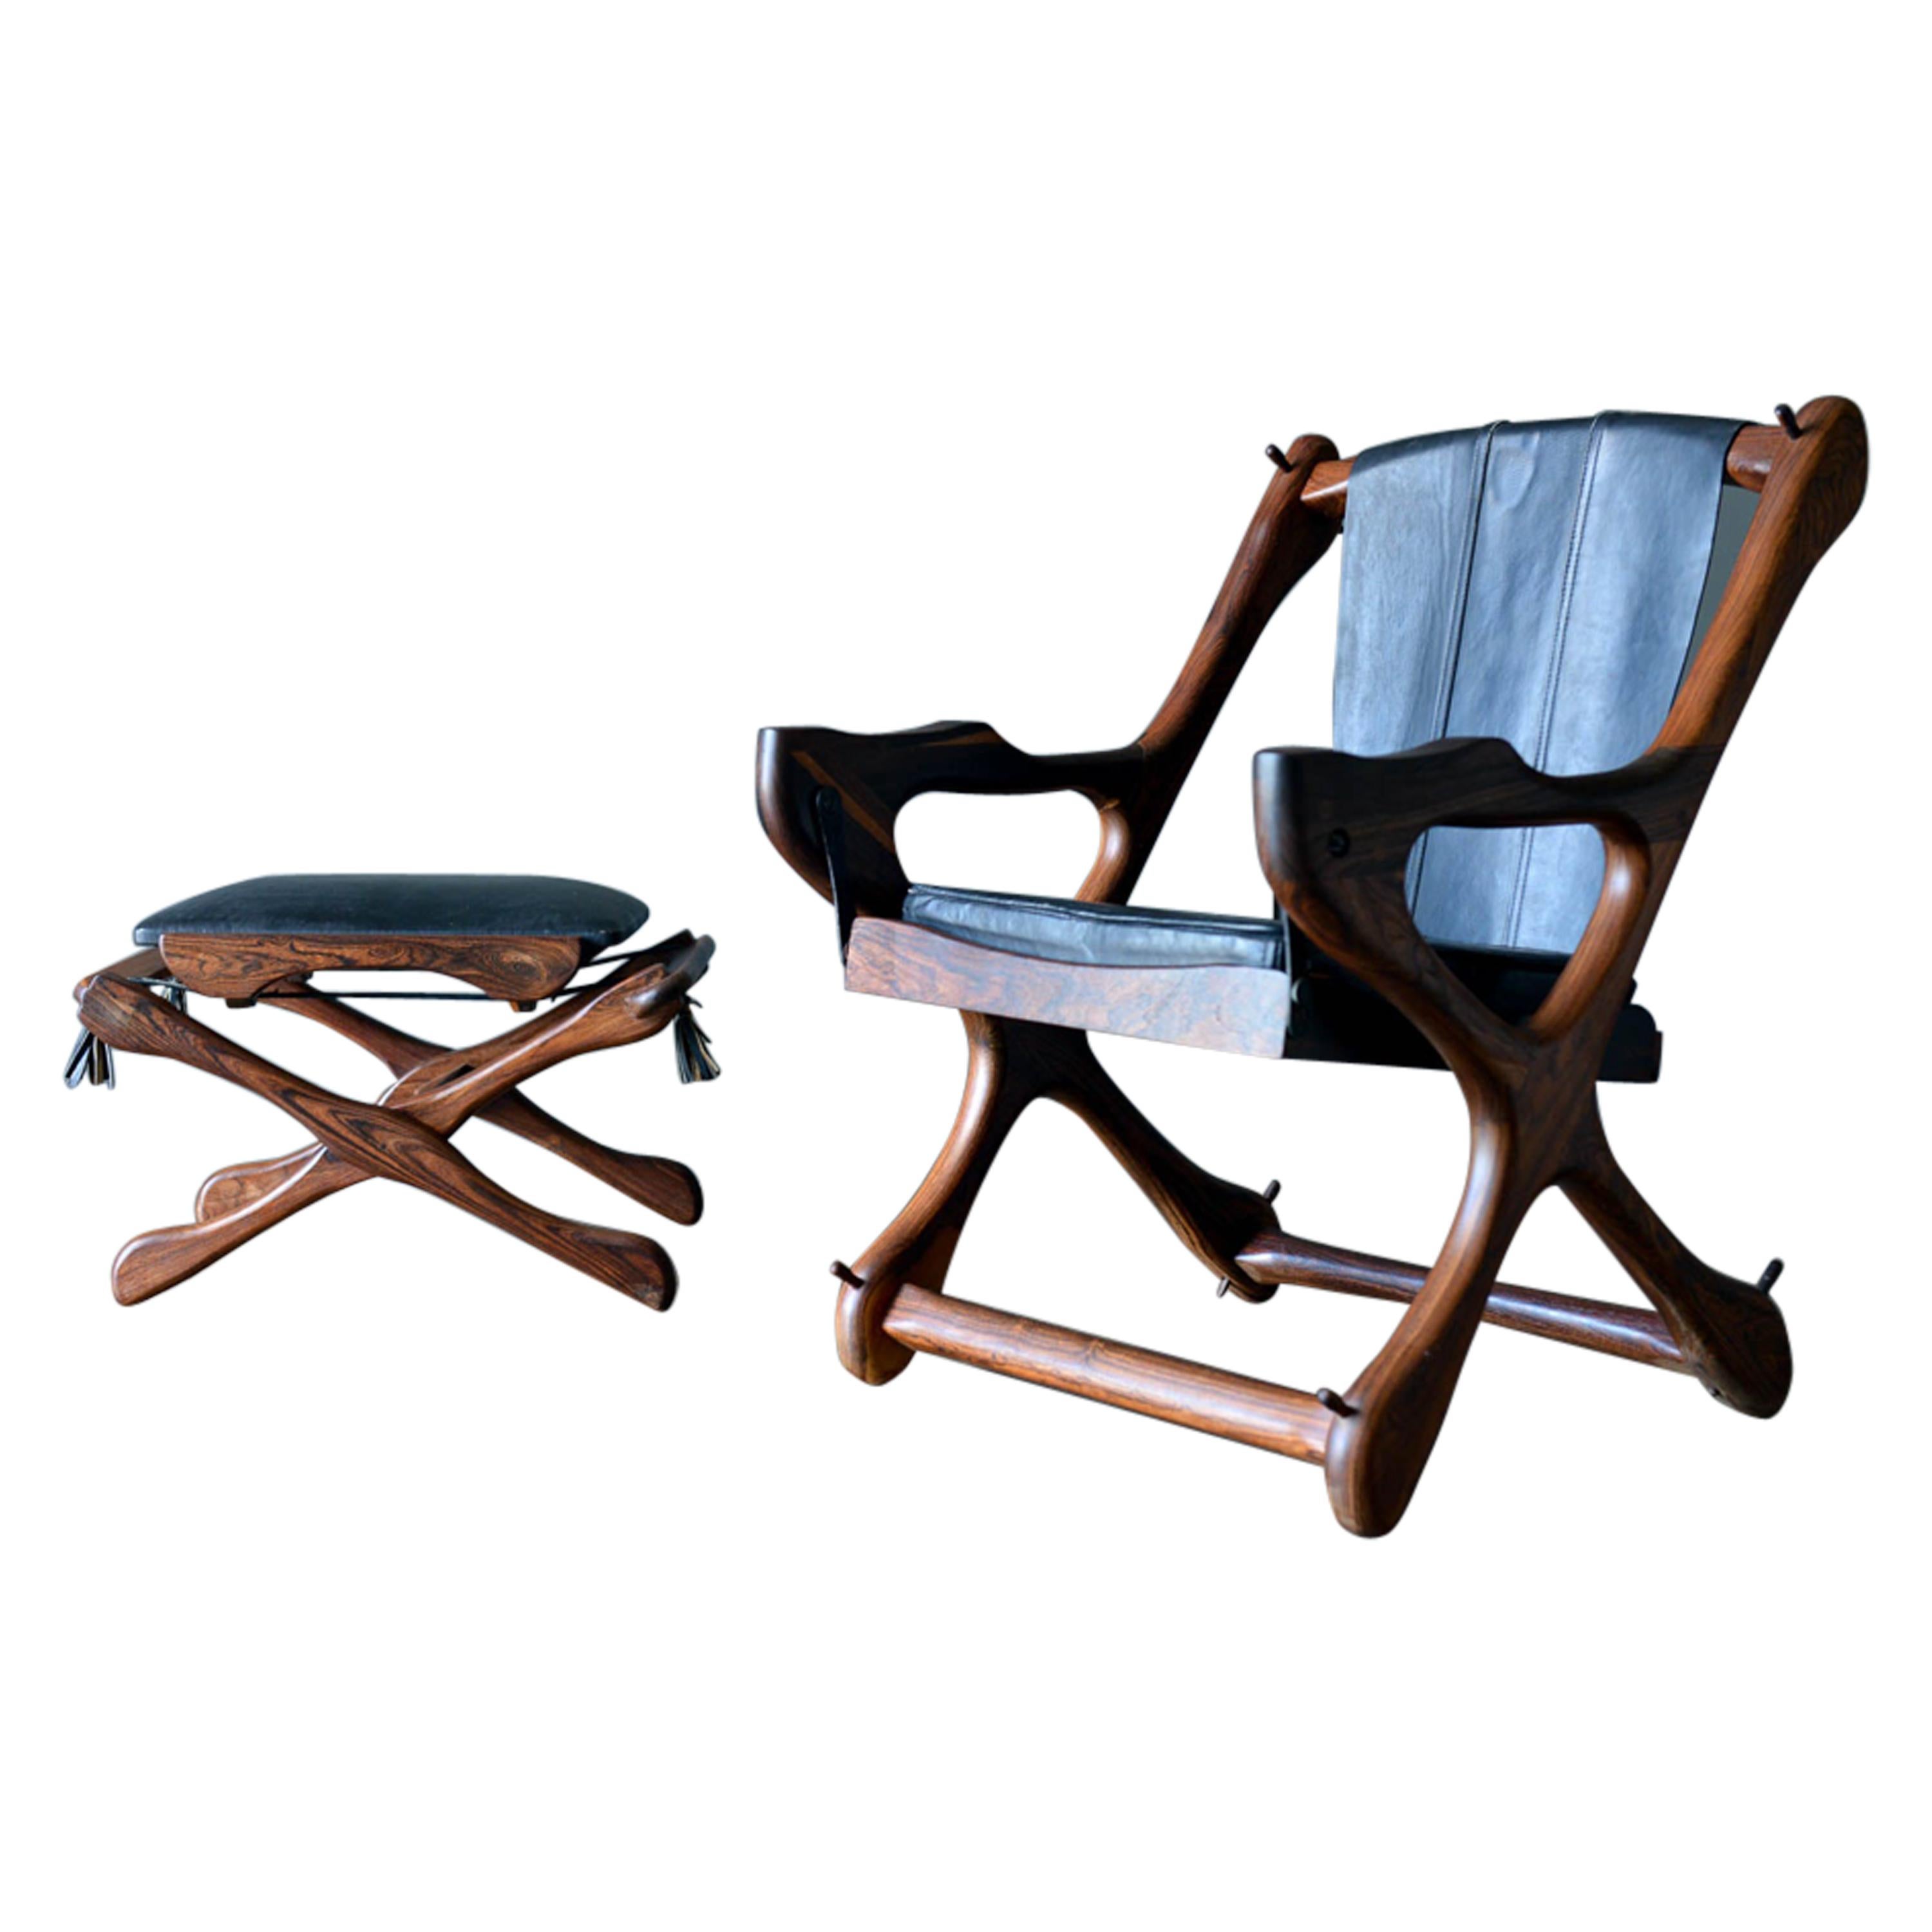 Don Shoemaker 'Swinger' Sling Chair and Ottoman, ca. 1965